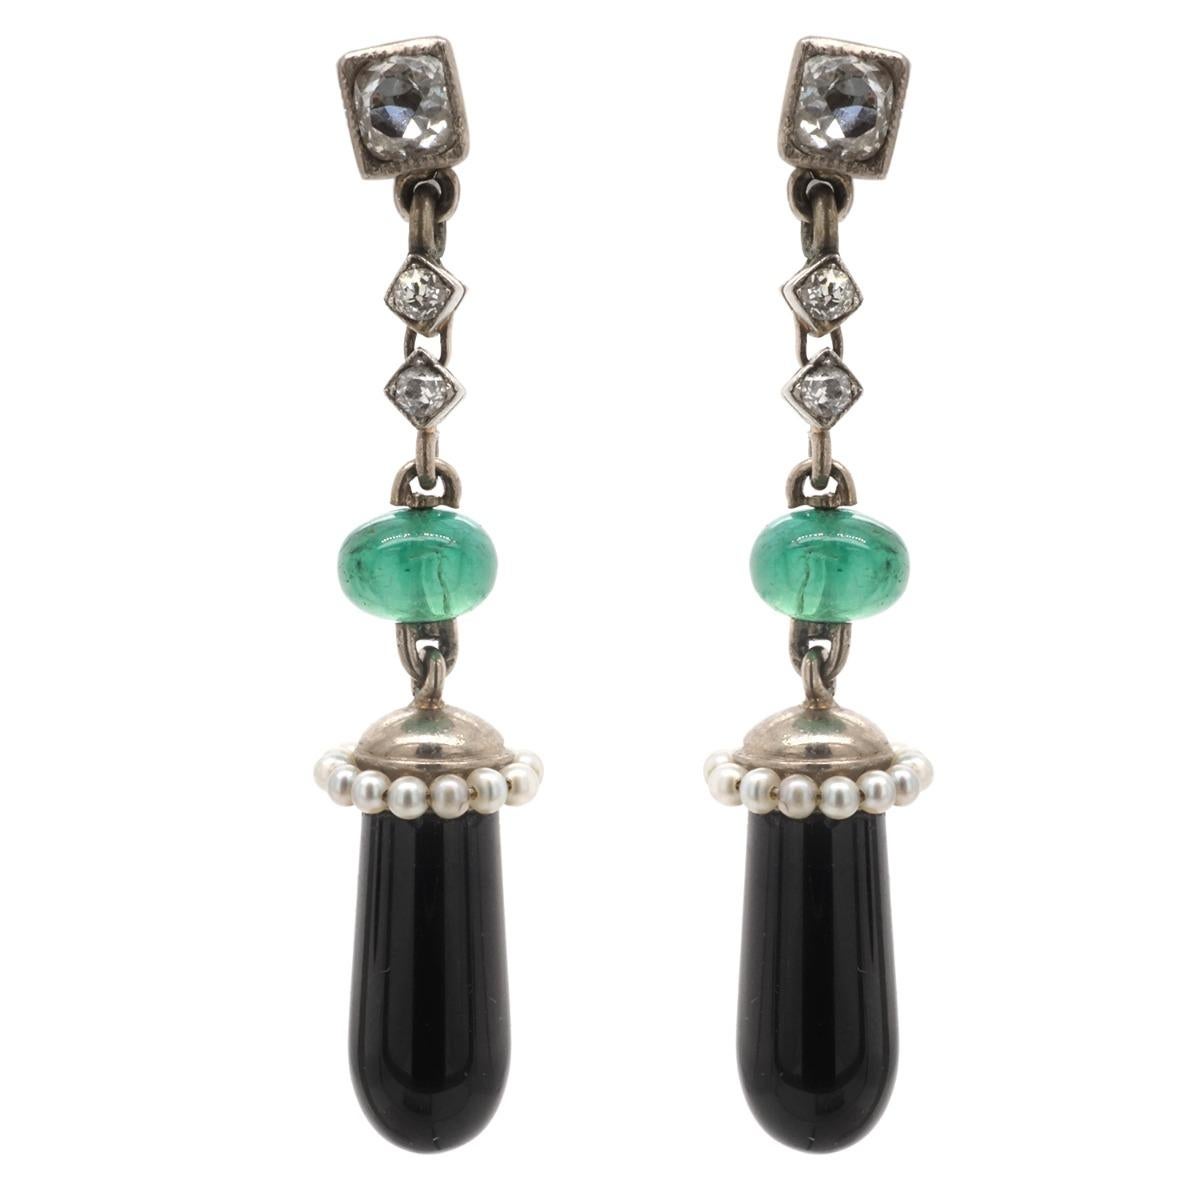 Art Deco Style earrings crafted in 18 karat white gold featuring old mine and swiss cut diamonds with 2 emerald beads 6 x 4mm and 2 black onyx drops 17.0 x 6.4mm.  Weigh 7.4 gr./4.8 dwt. Dimensions L 1 3/4